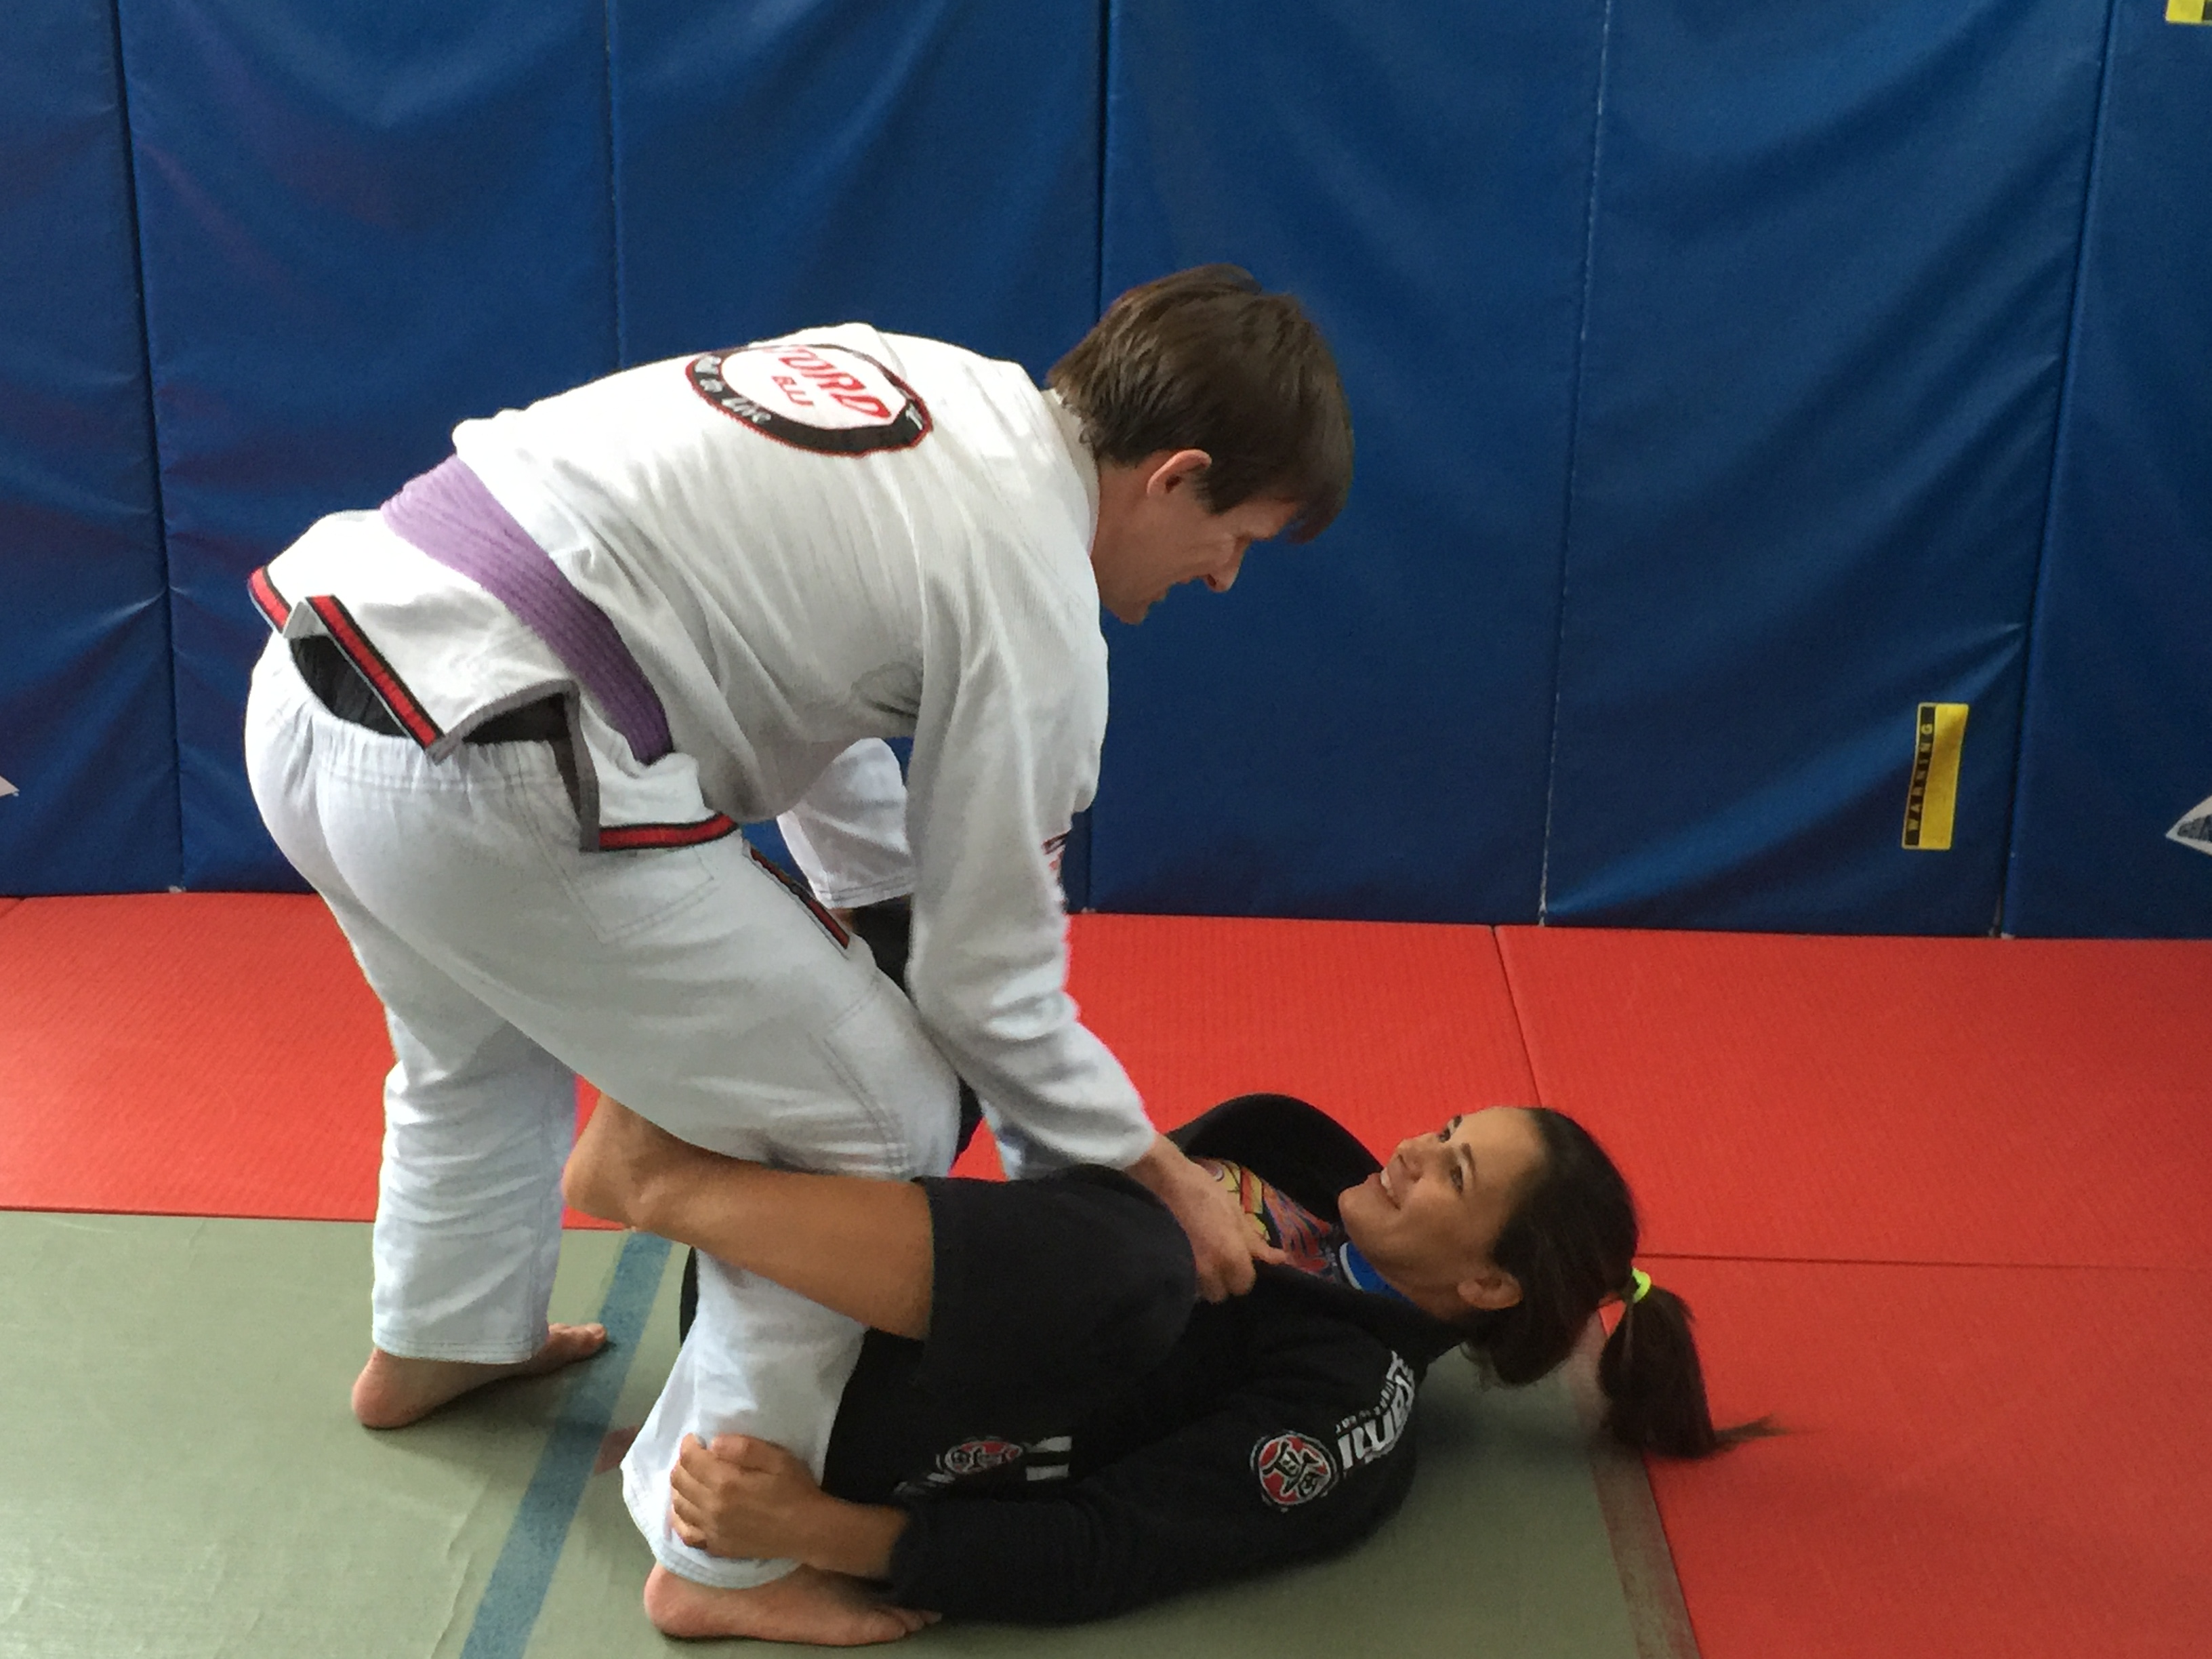 How Do I Get The Most Out Of Drilling For BJJ?